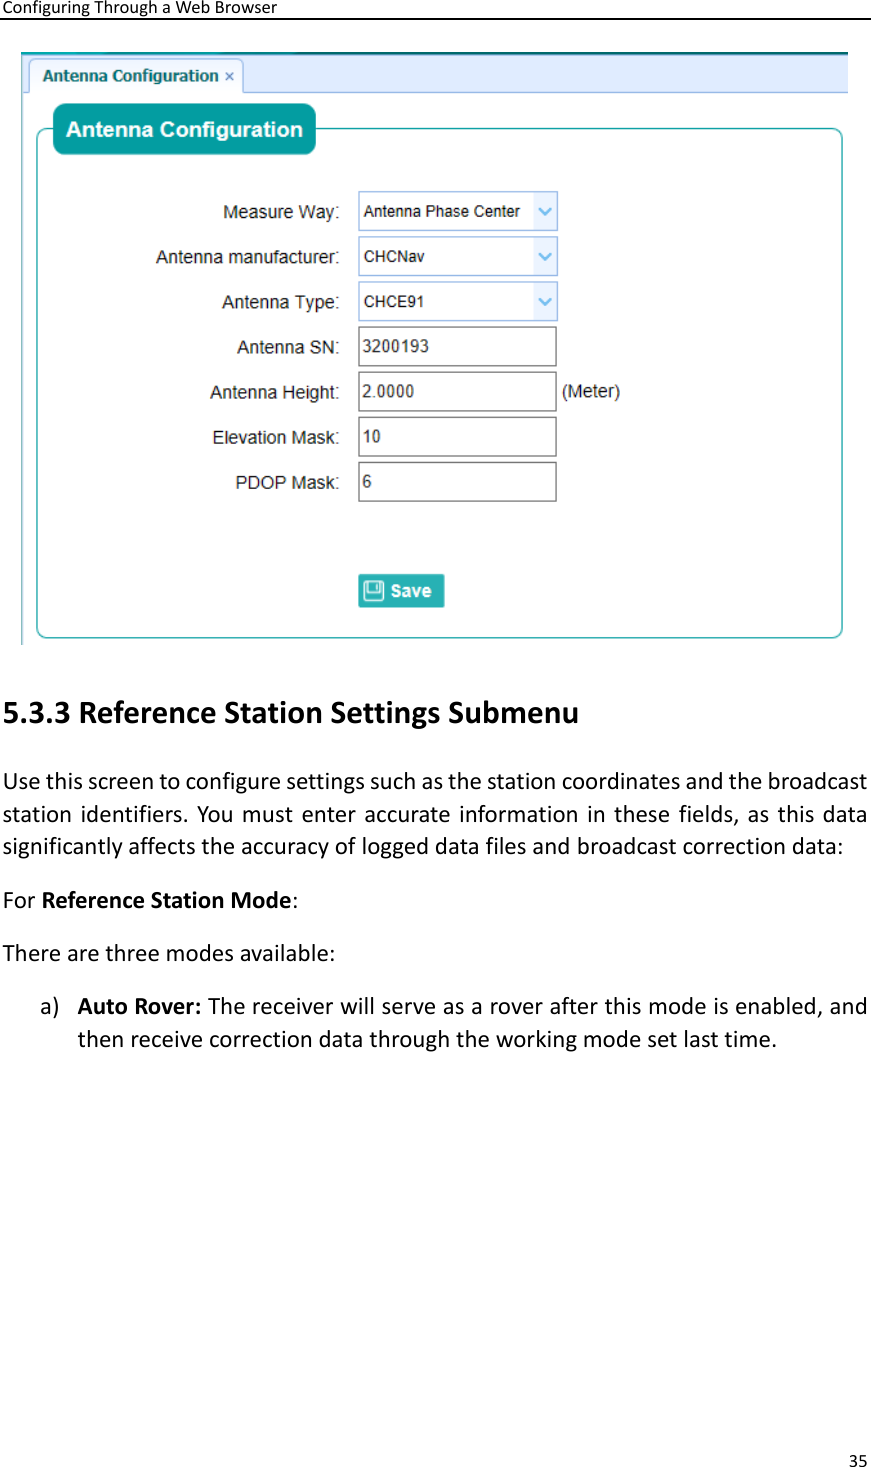 Configuring Through a Web Browser 35   5.3.3 Reference Station Settings Submenu Use this screen to configure settings such as the station coordinates and the broadcast station identifiers. You must enter accurate information in these fields, as this data significantly affects the accuracy of logged data files and broadcast correction data:   For Reference Station Mode: There are three modes available:   a) Auto Rover: The receiver will serve as a rover after this mode is enabled, and then receive correction data through the working mode set last time. 